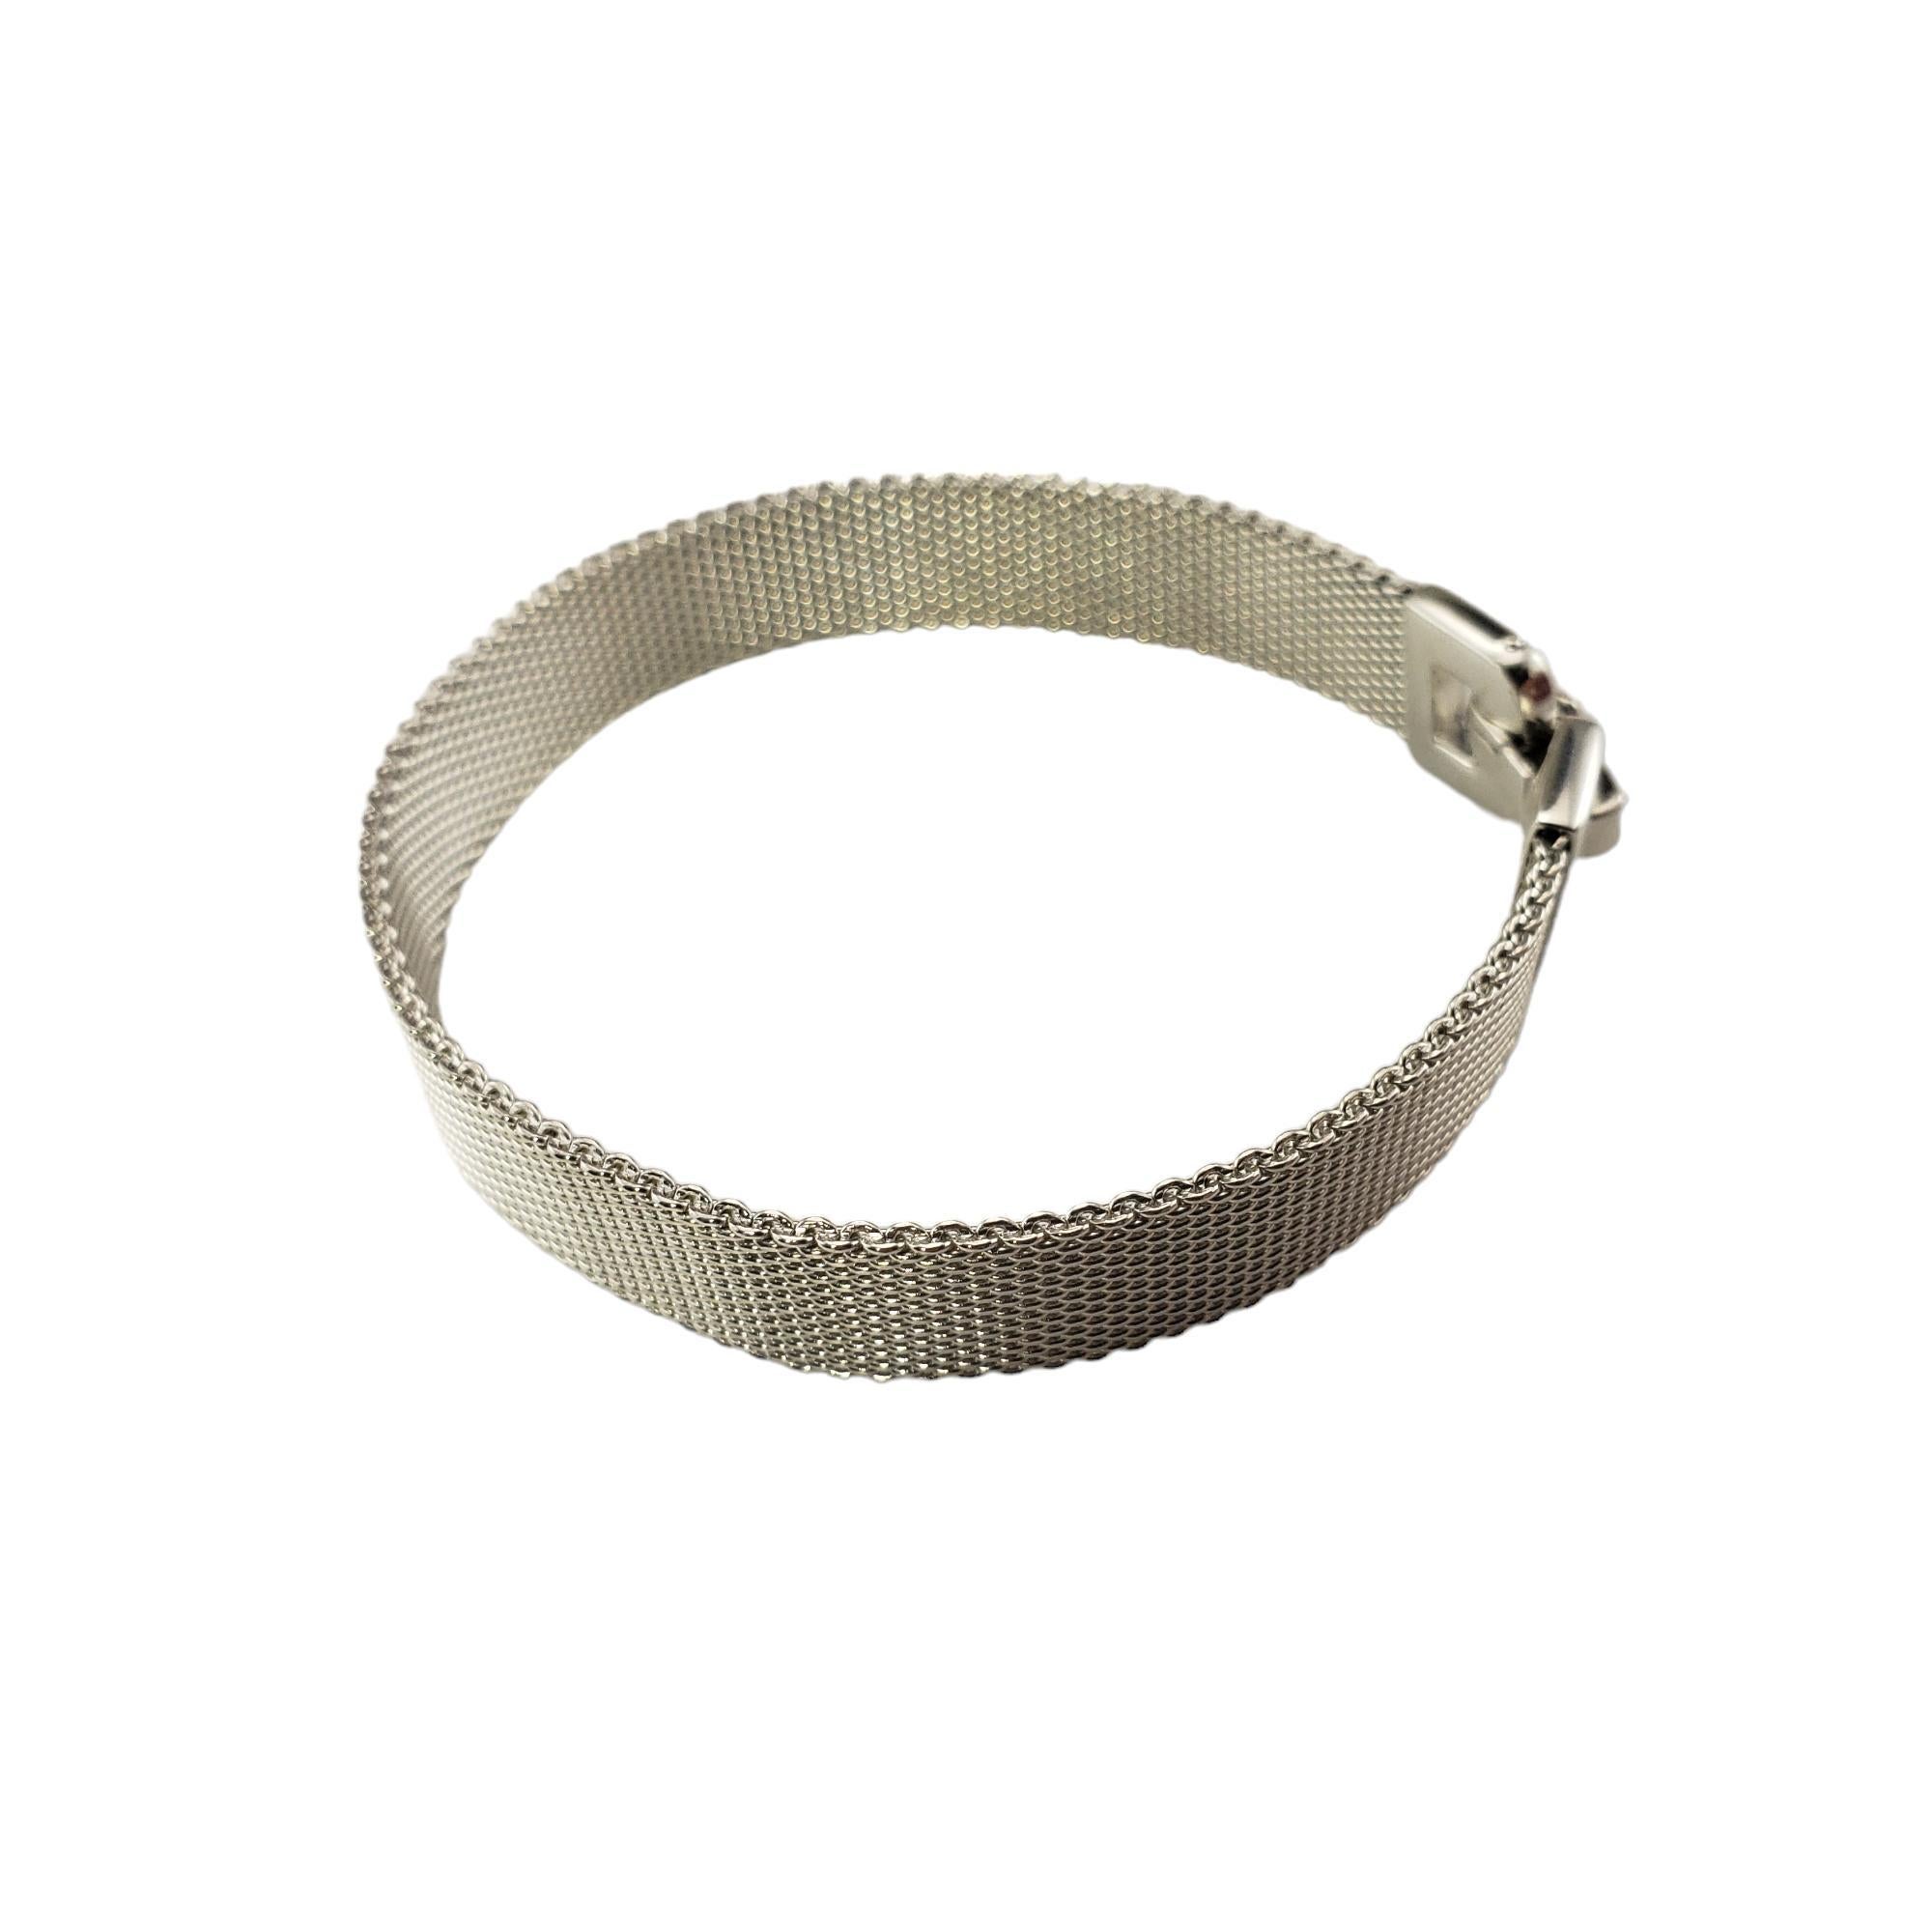 Vintage Tiffany & Co. Sterling Silver Somerset Mesh Bracelet-

This elegant mesh bracelet by Tiffany & Co. is crafted in meticulously detailed sterling silver.  Width: 9 mm.

Size: 6.5 inches

Hallmark:  T&CO.  925

Weight:  15.8 gr./  10.1